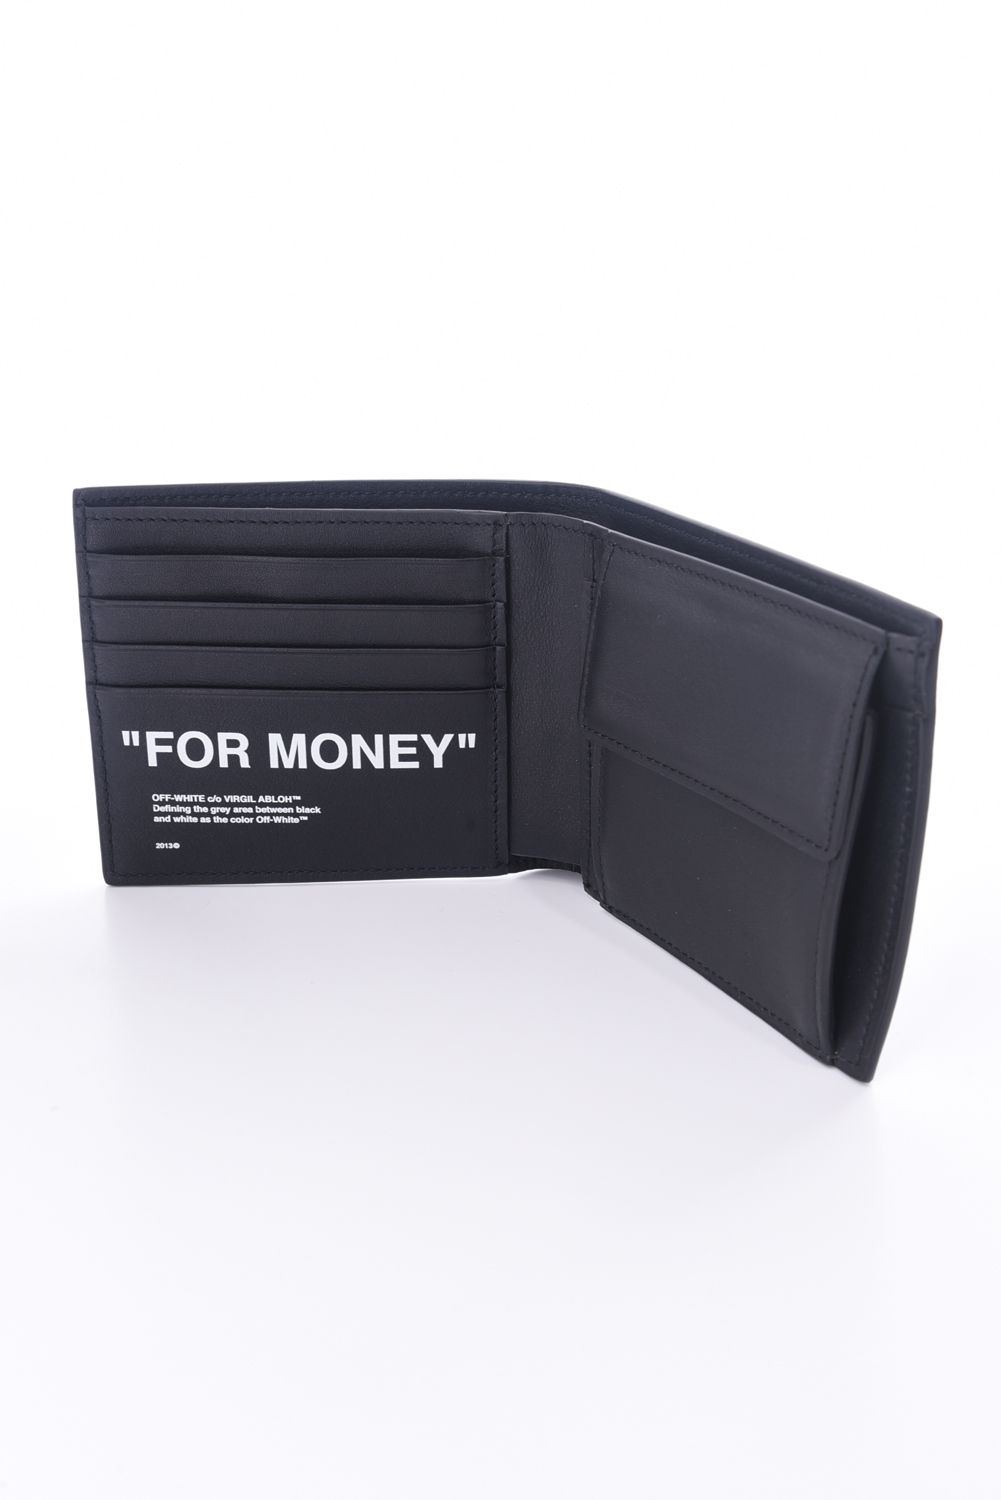 OFF-WHITE - FOR MONEY LEATHER WALLET / ロゴプリント レザー 二